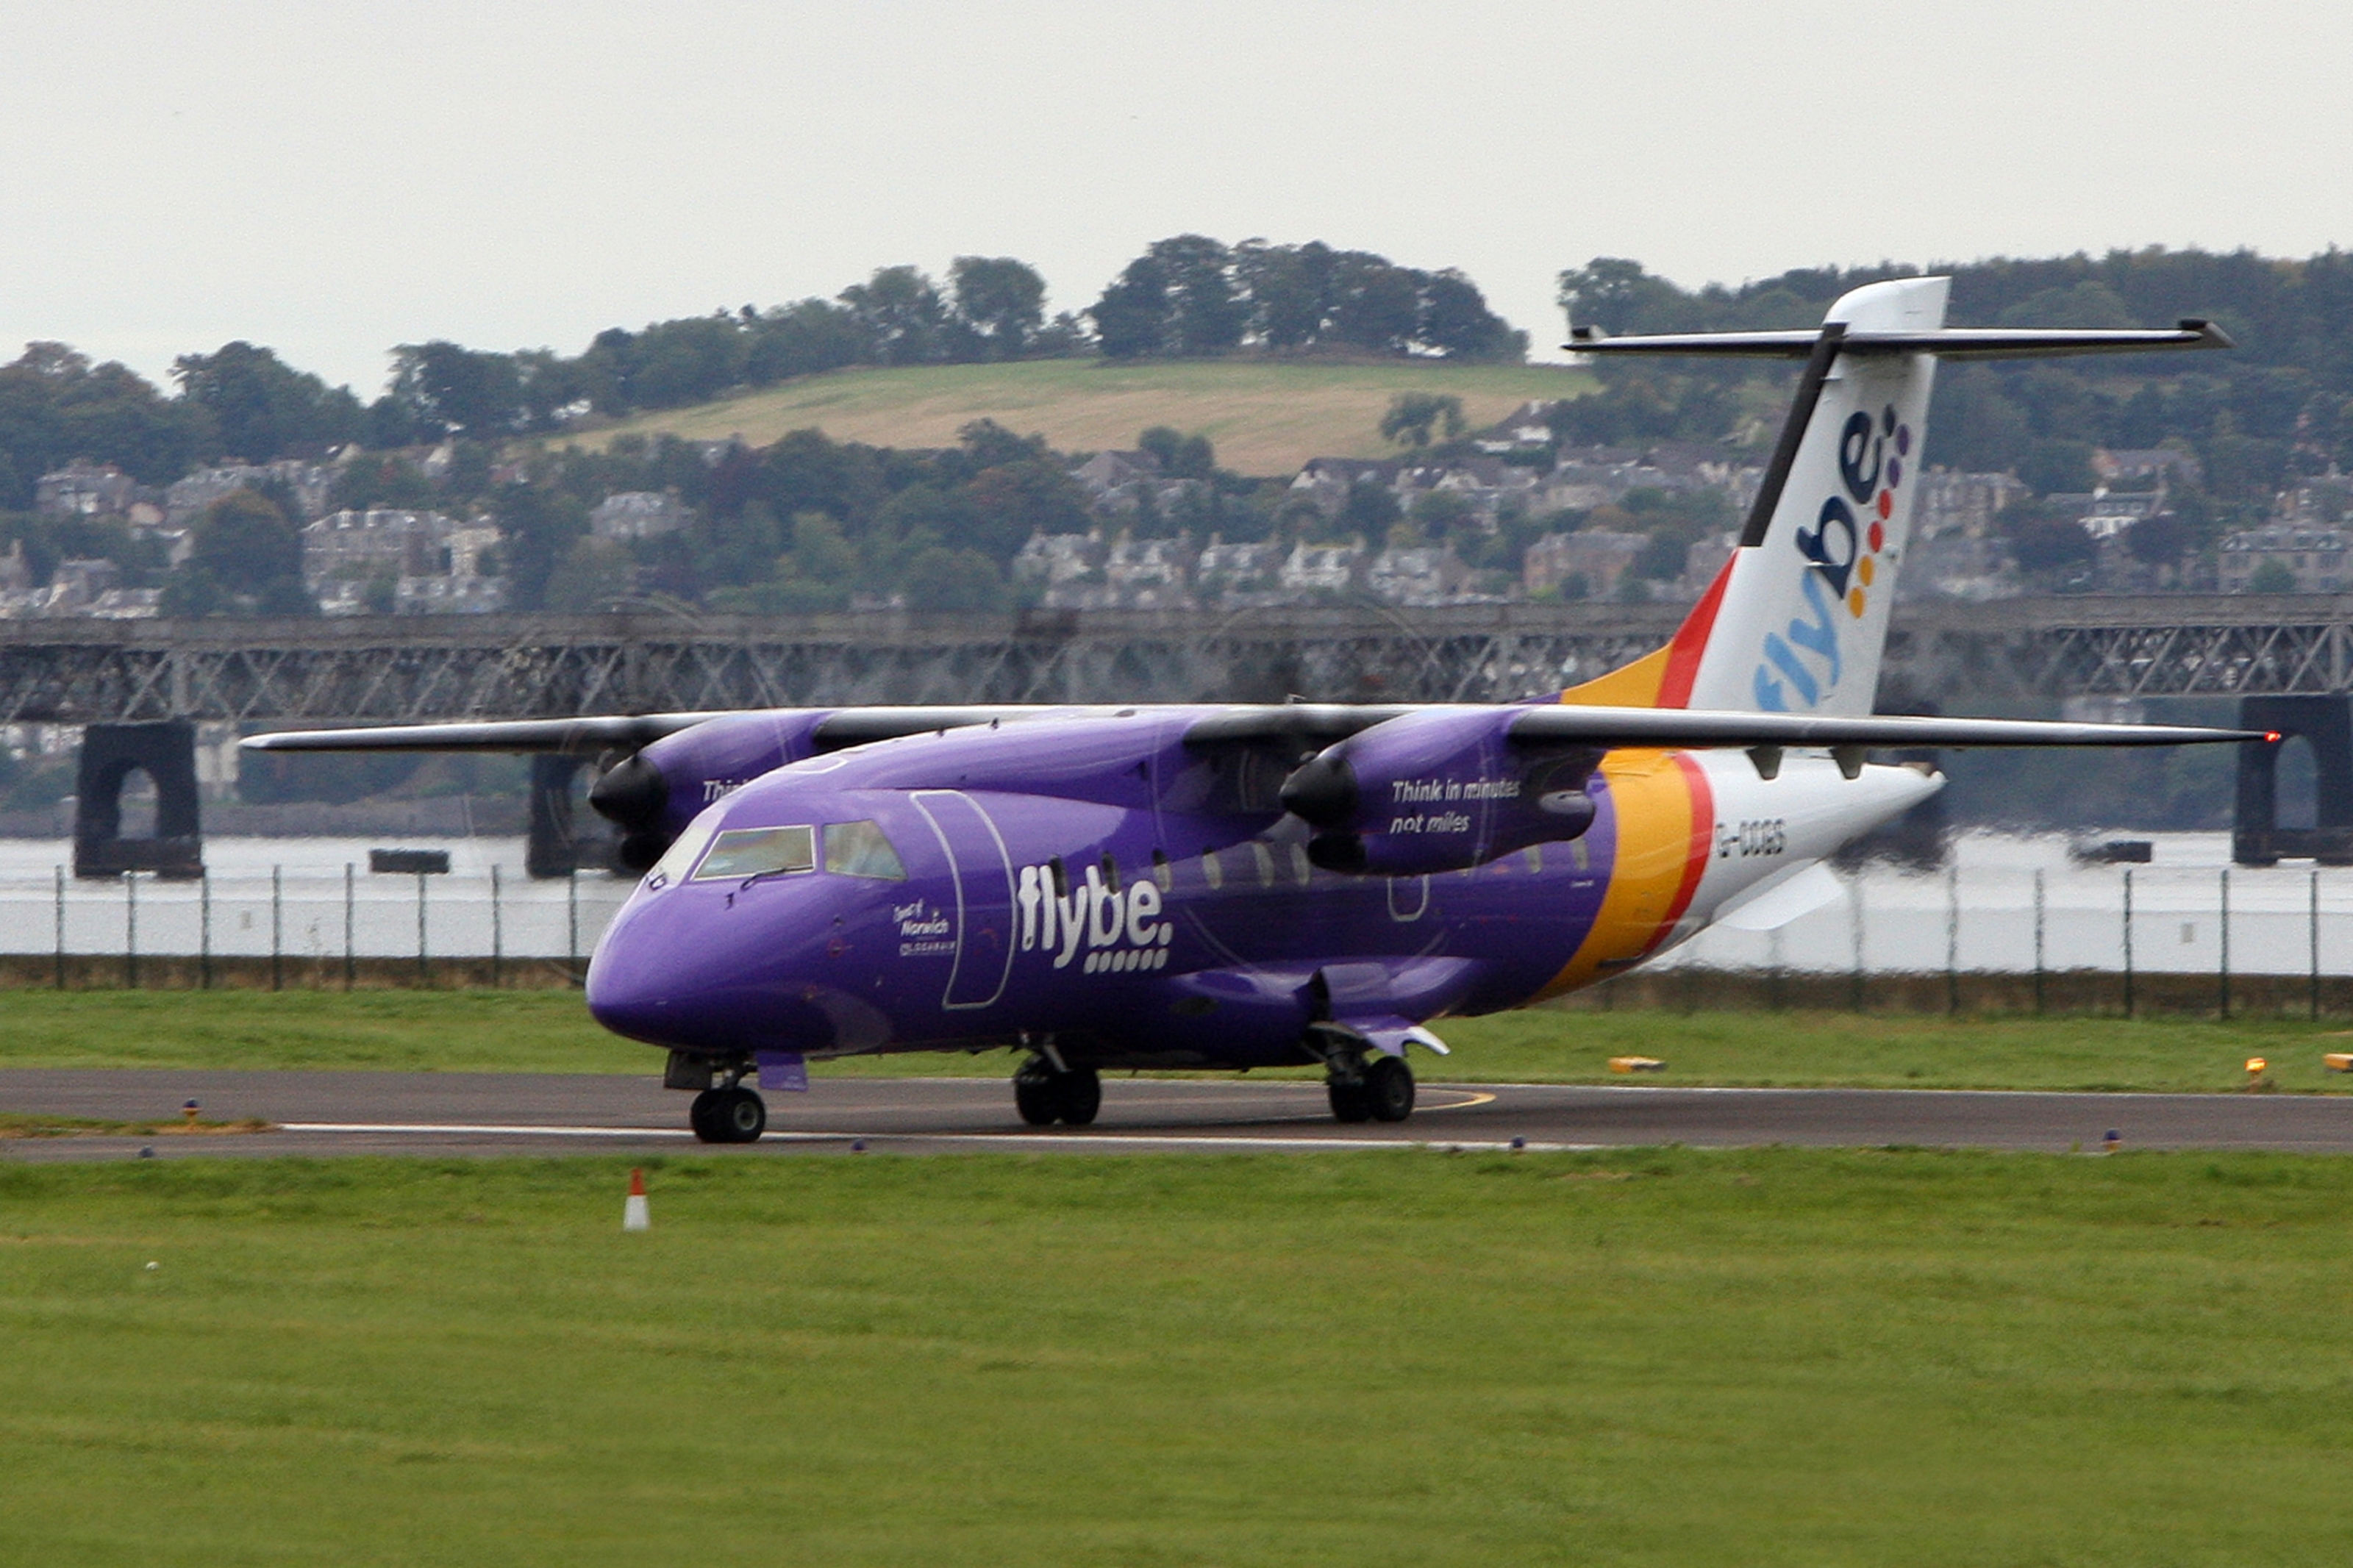 A Flybe plane at Dundee airport.